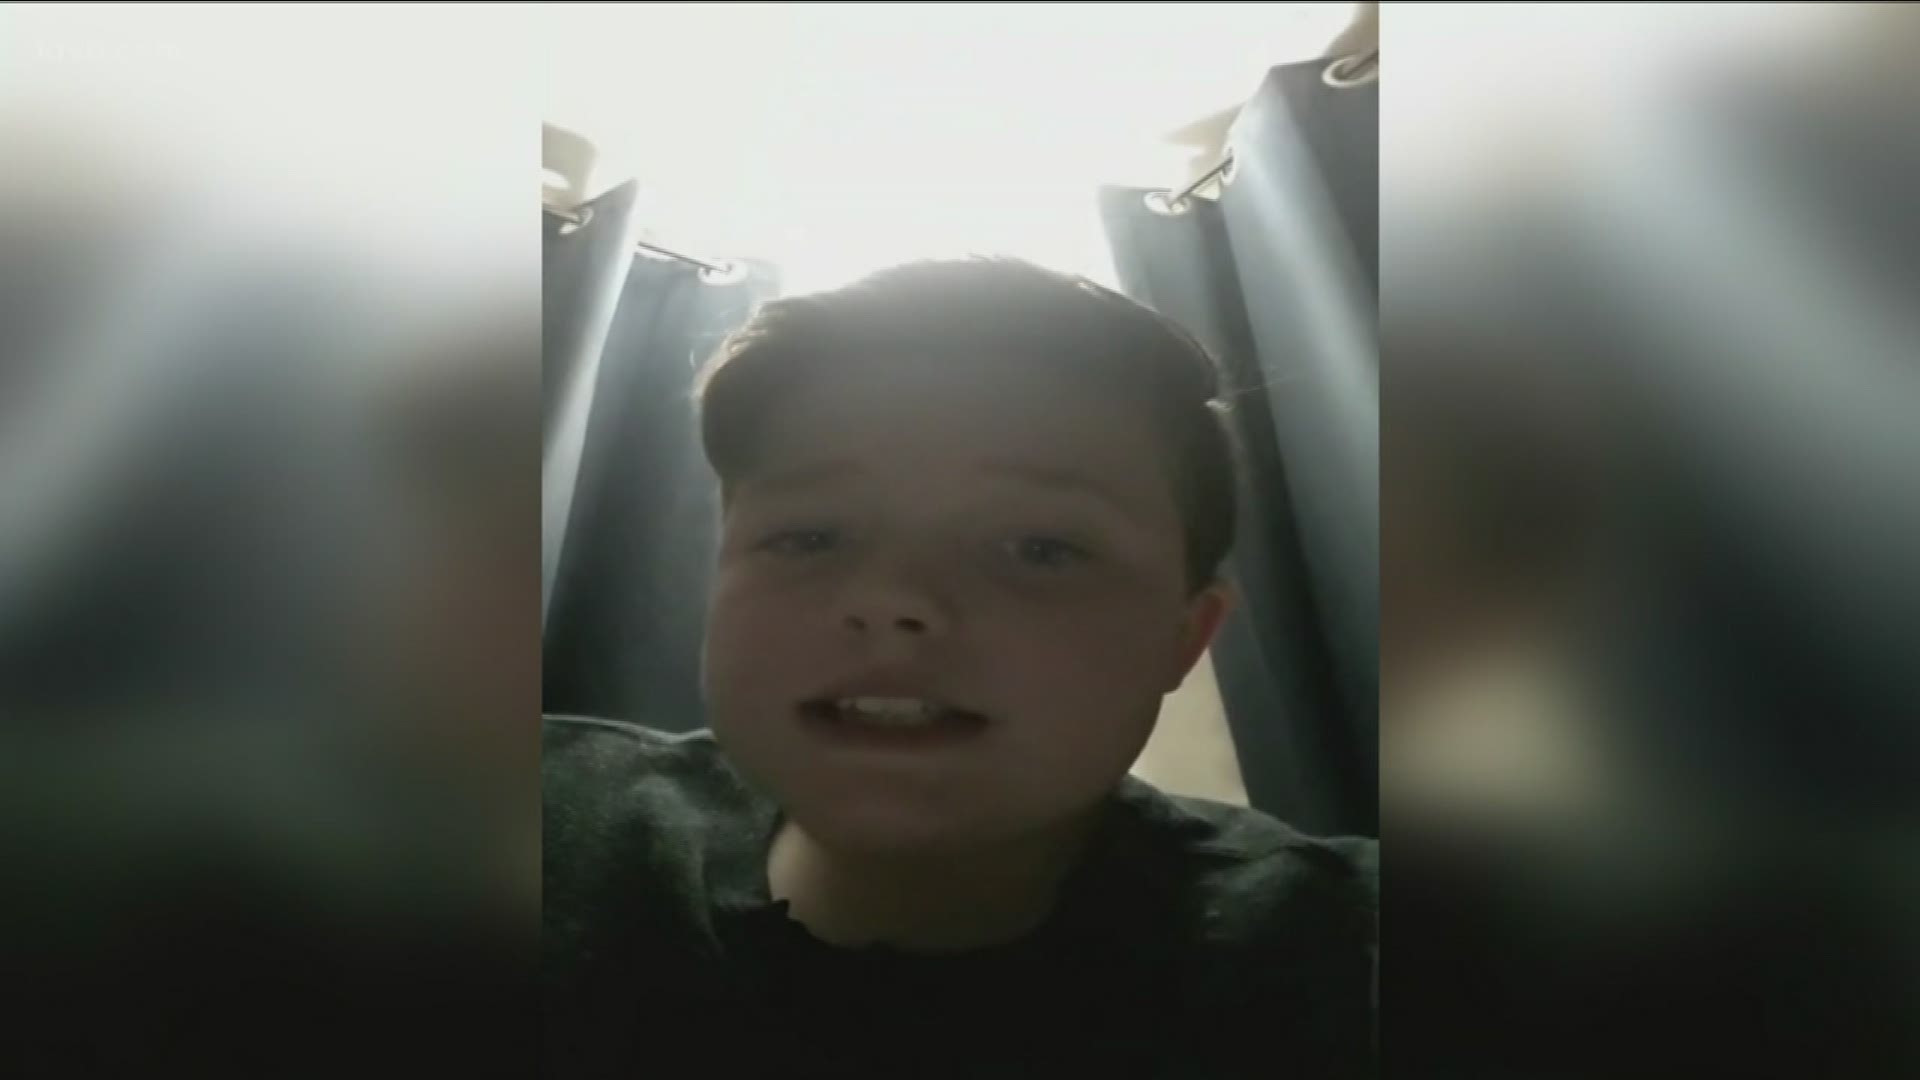 Micah Pecyna, 11, was shot and killed Sunday night.